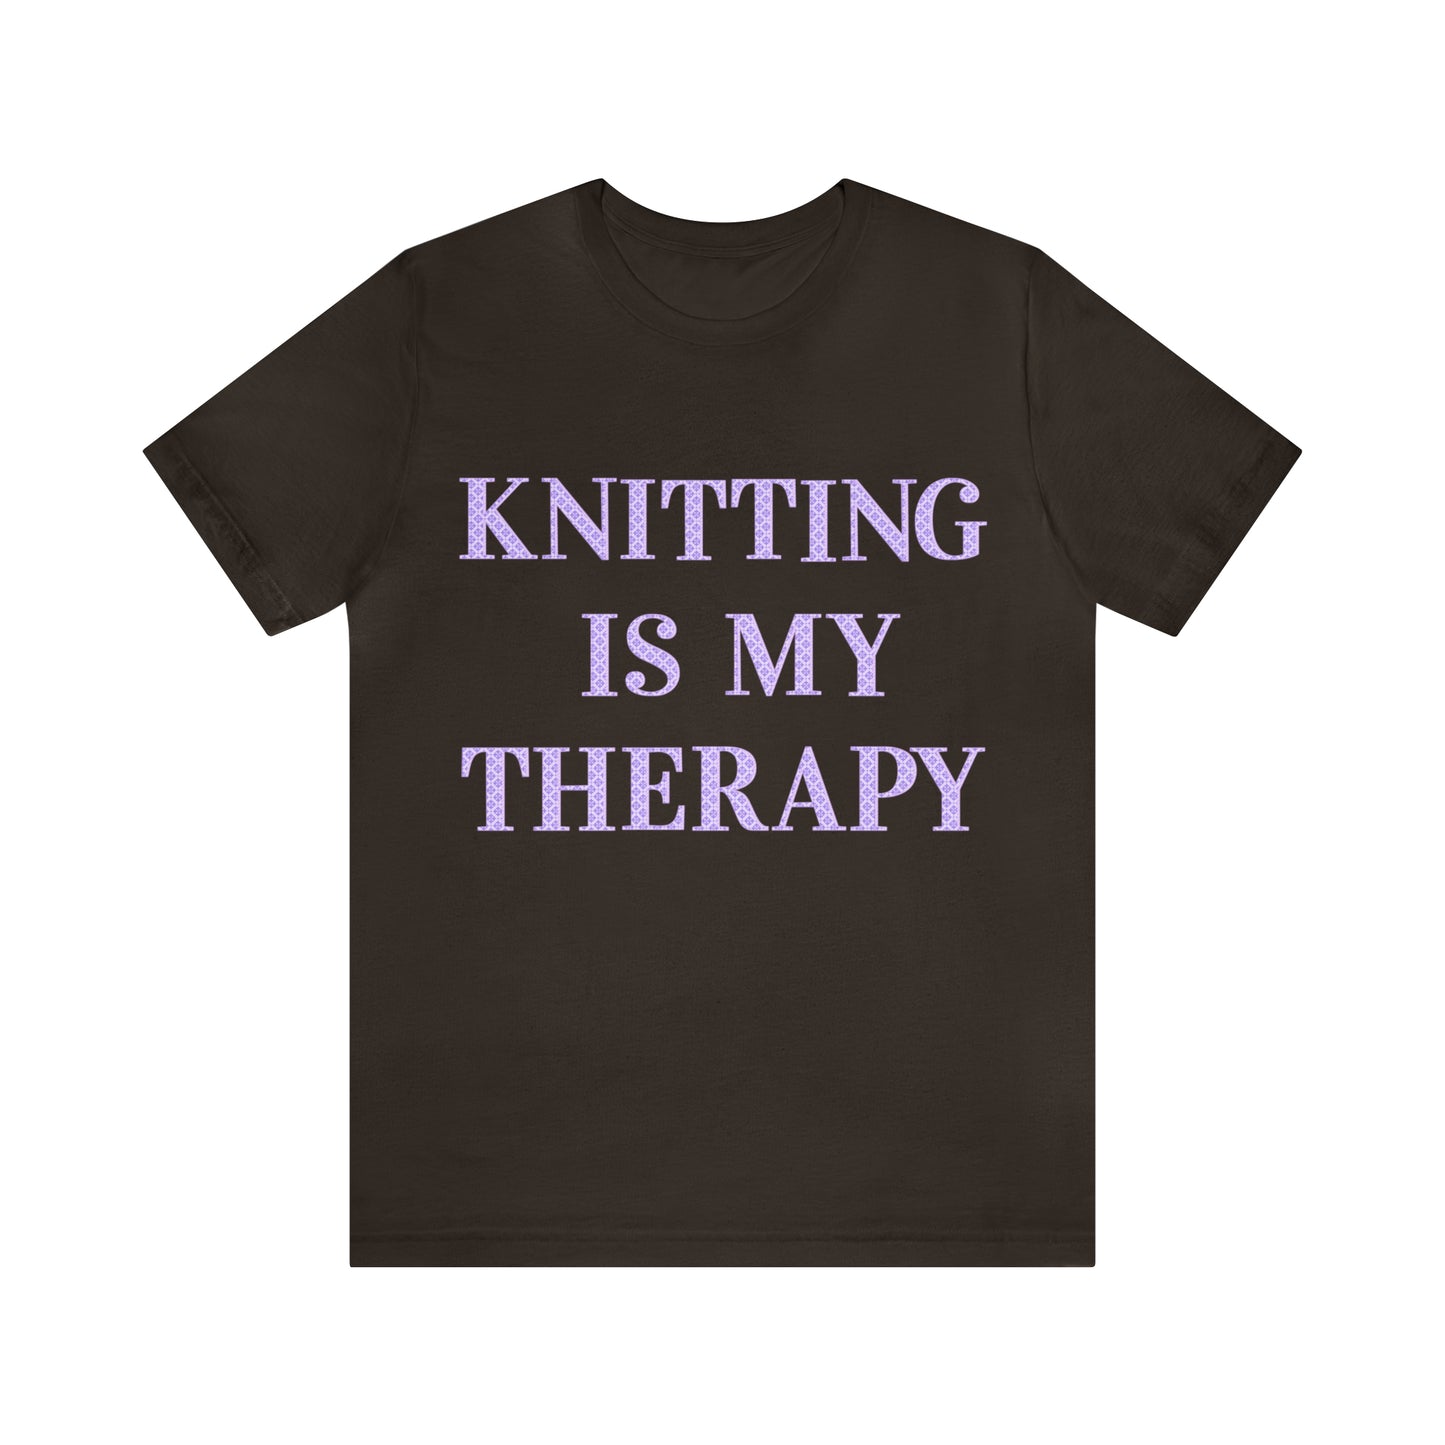 Knitting Is My Therapy- Adult, Regular Fit, Soft Cotton, T-shirt